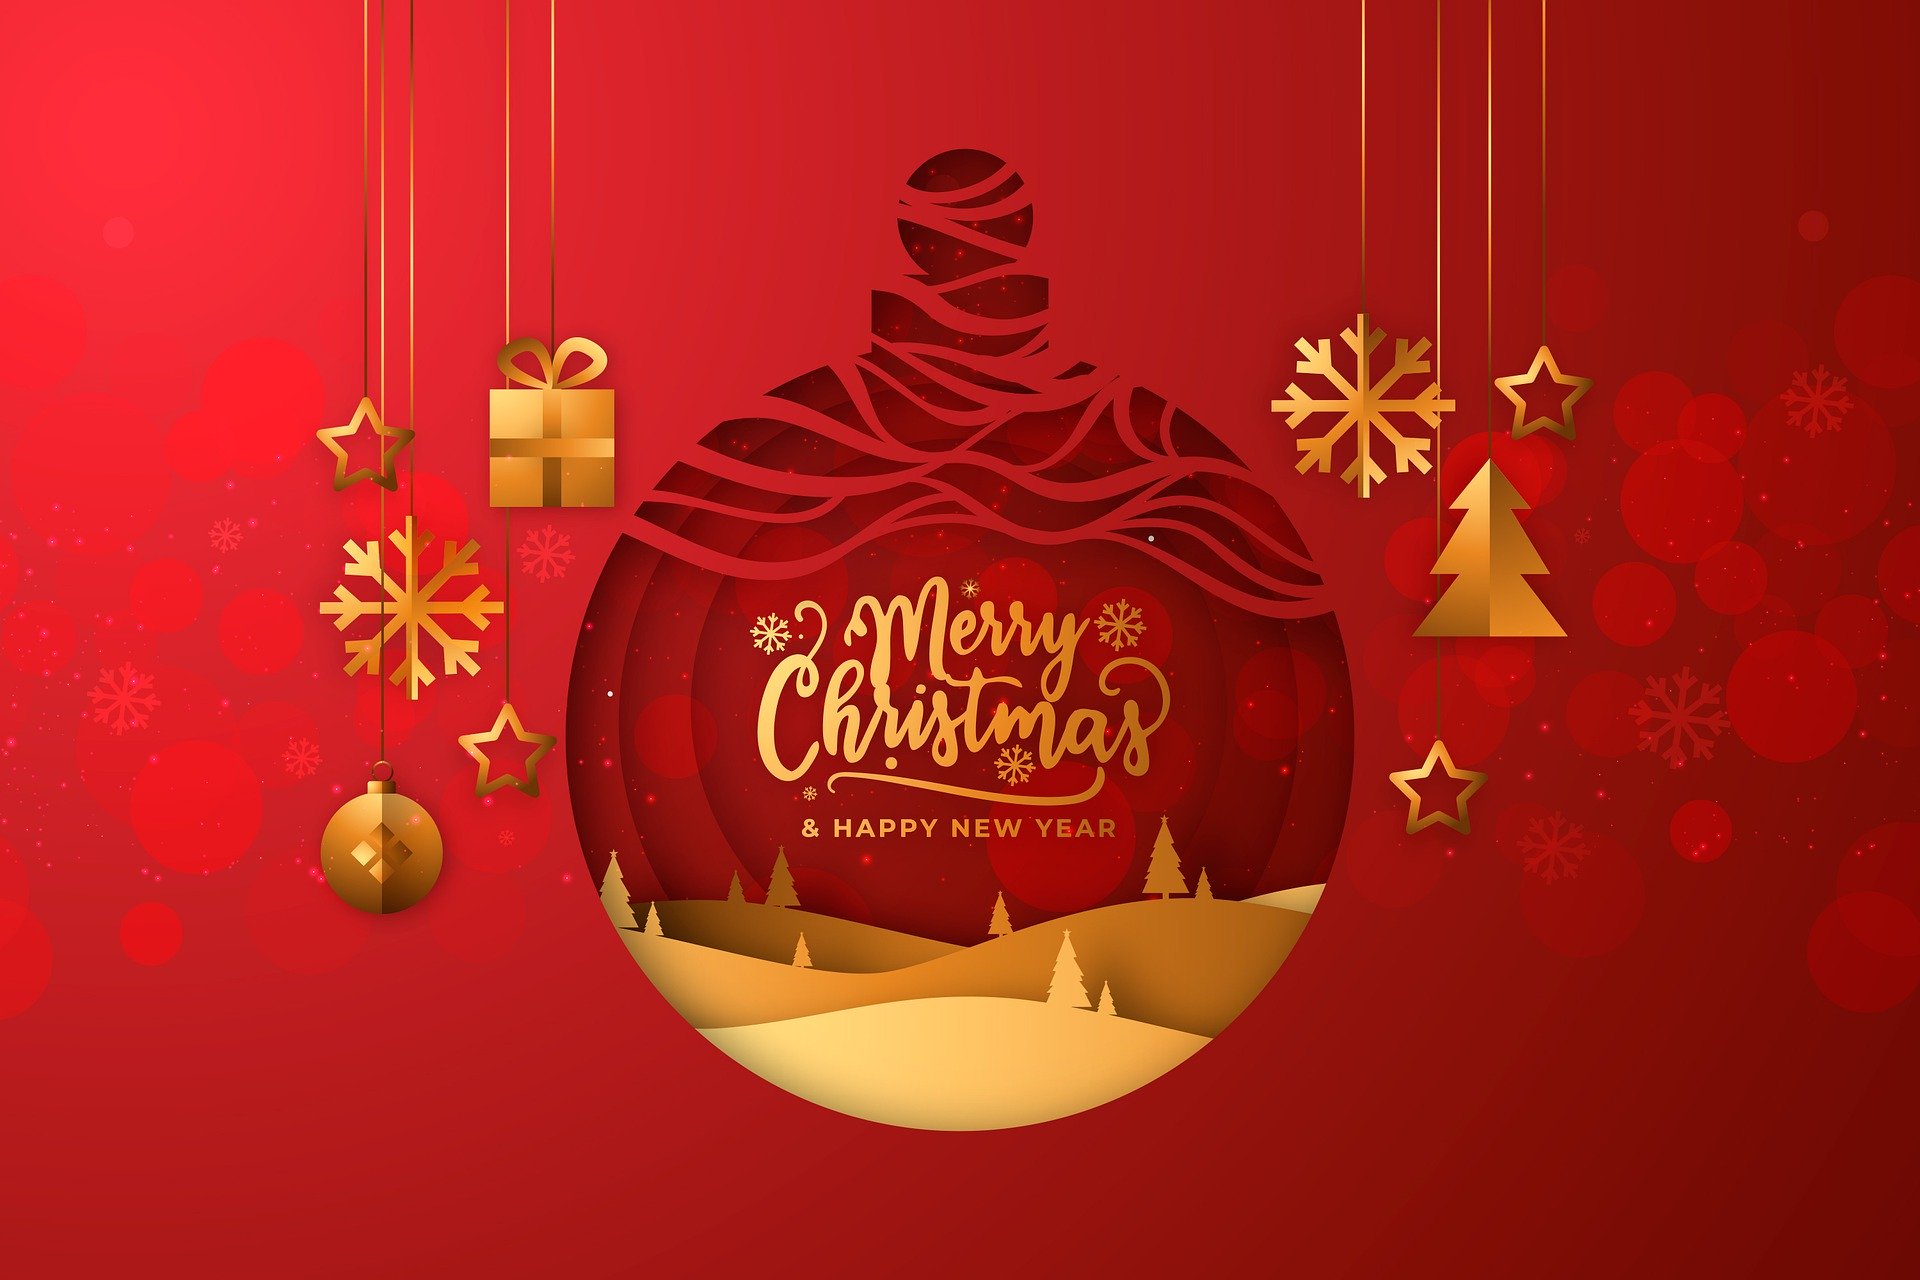 Wishing you a Merry Christmas and Happy New Year